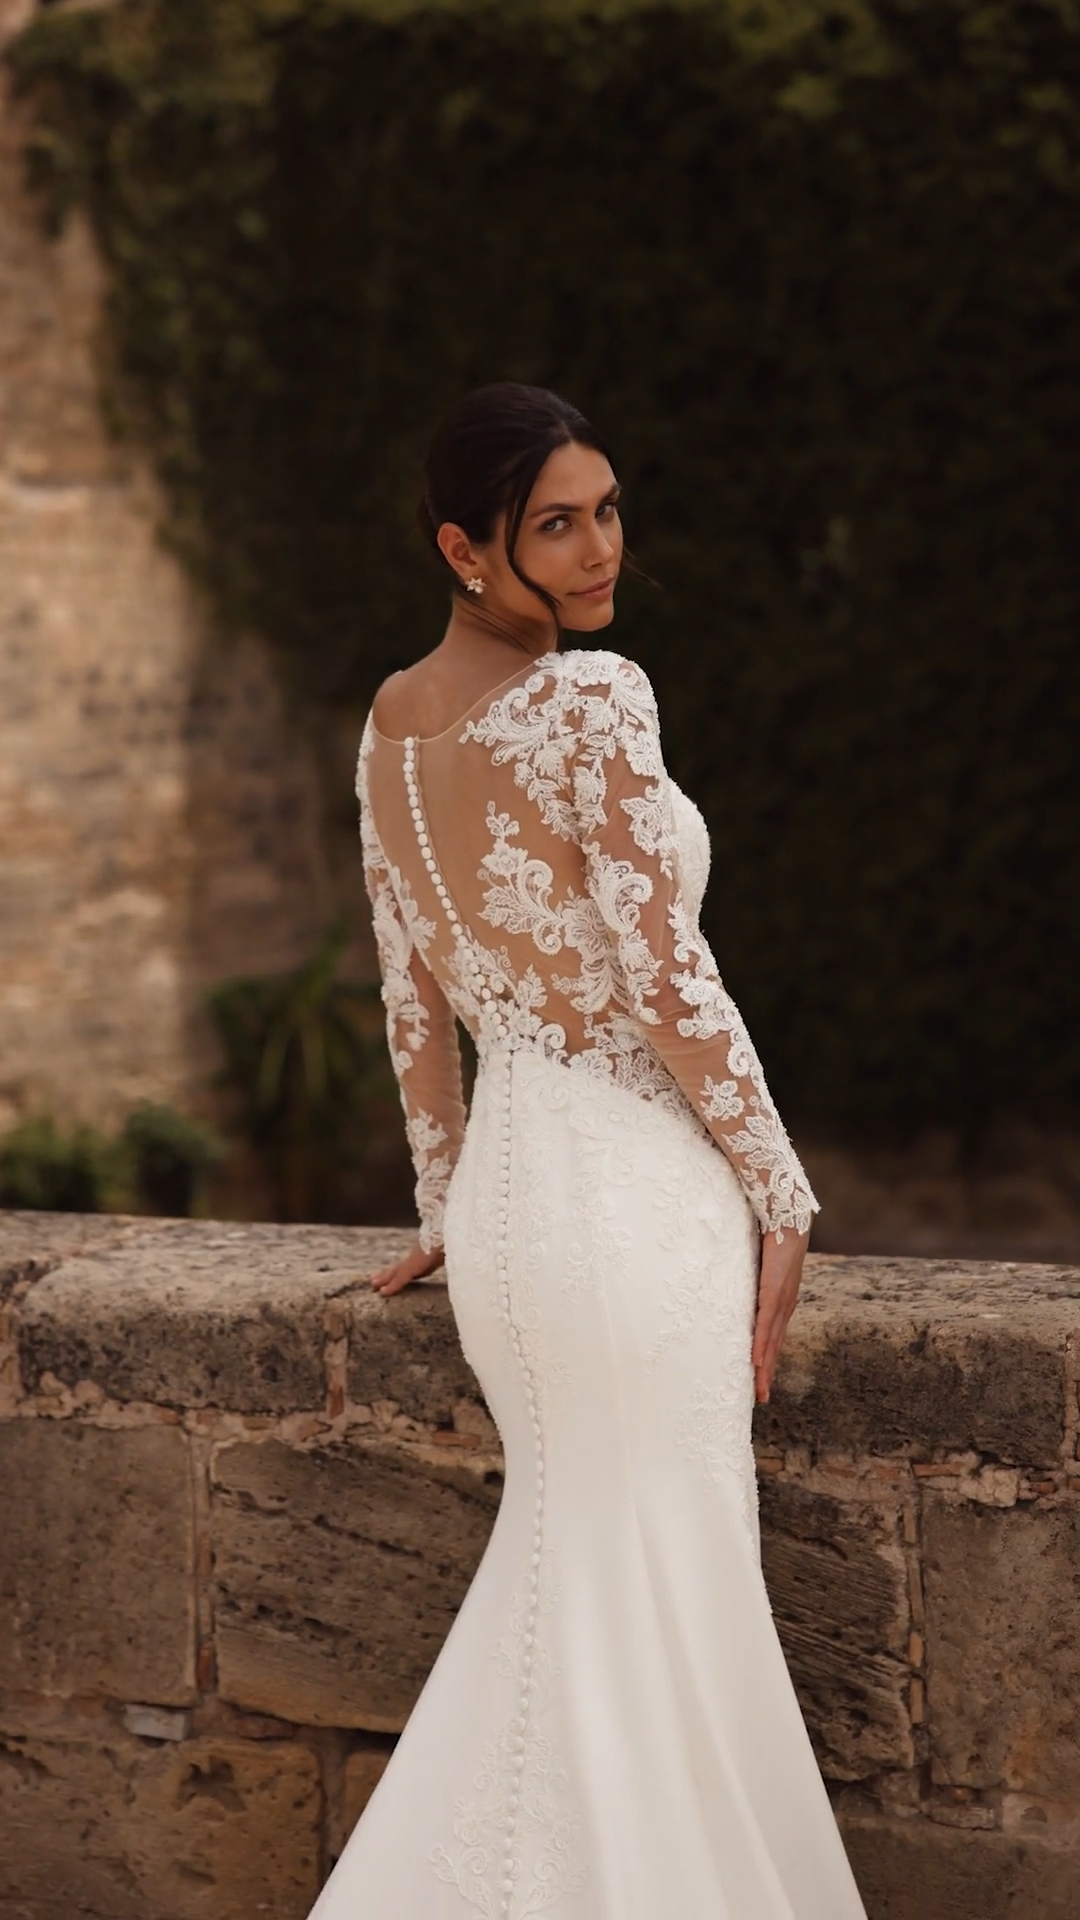 Sexy long sleeve crepe wedding dress with side bodice cutouts and lace scalloped train